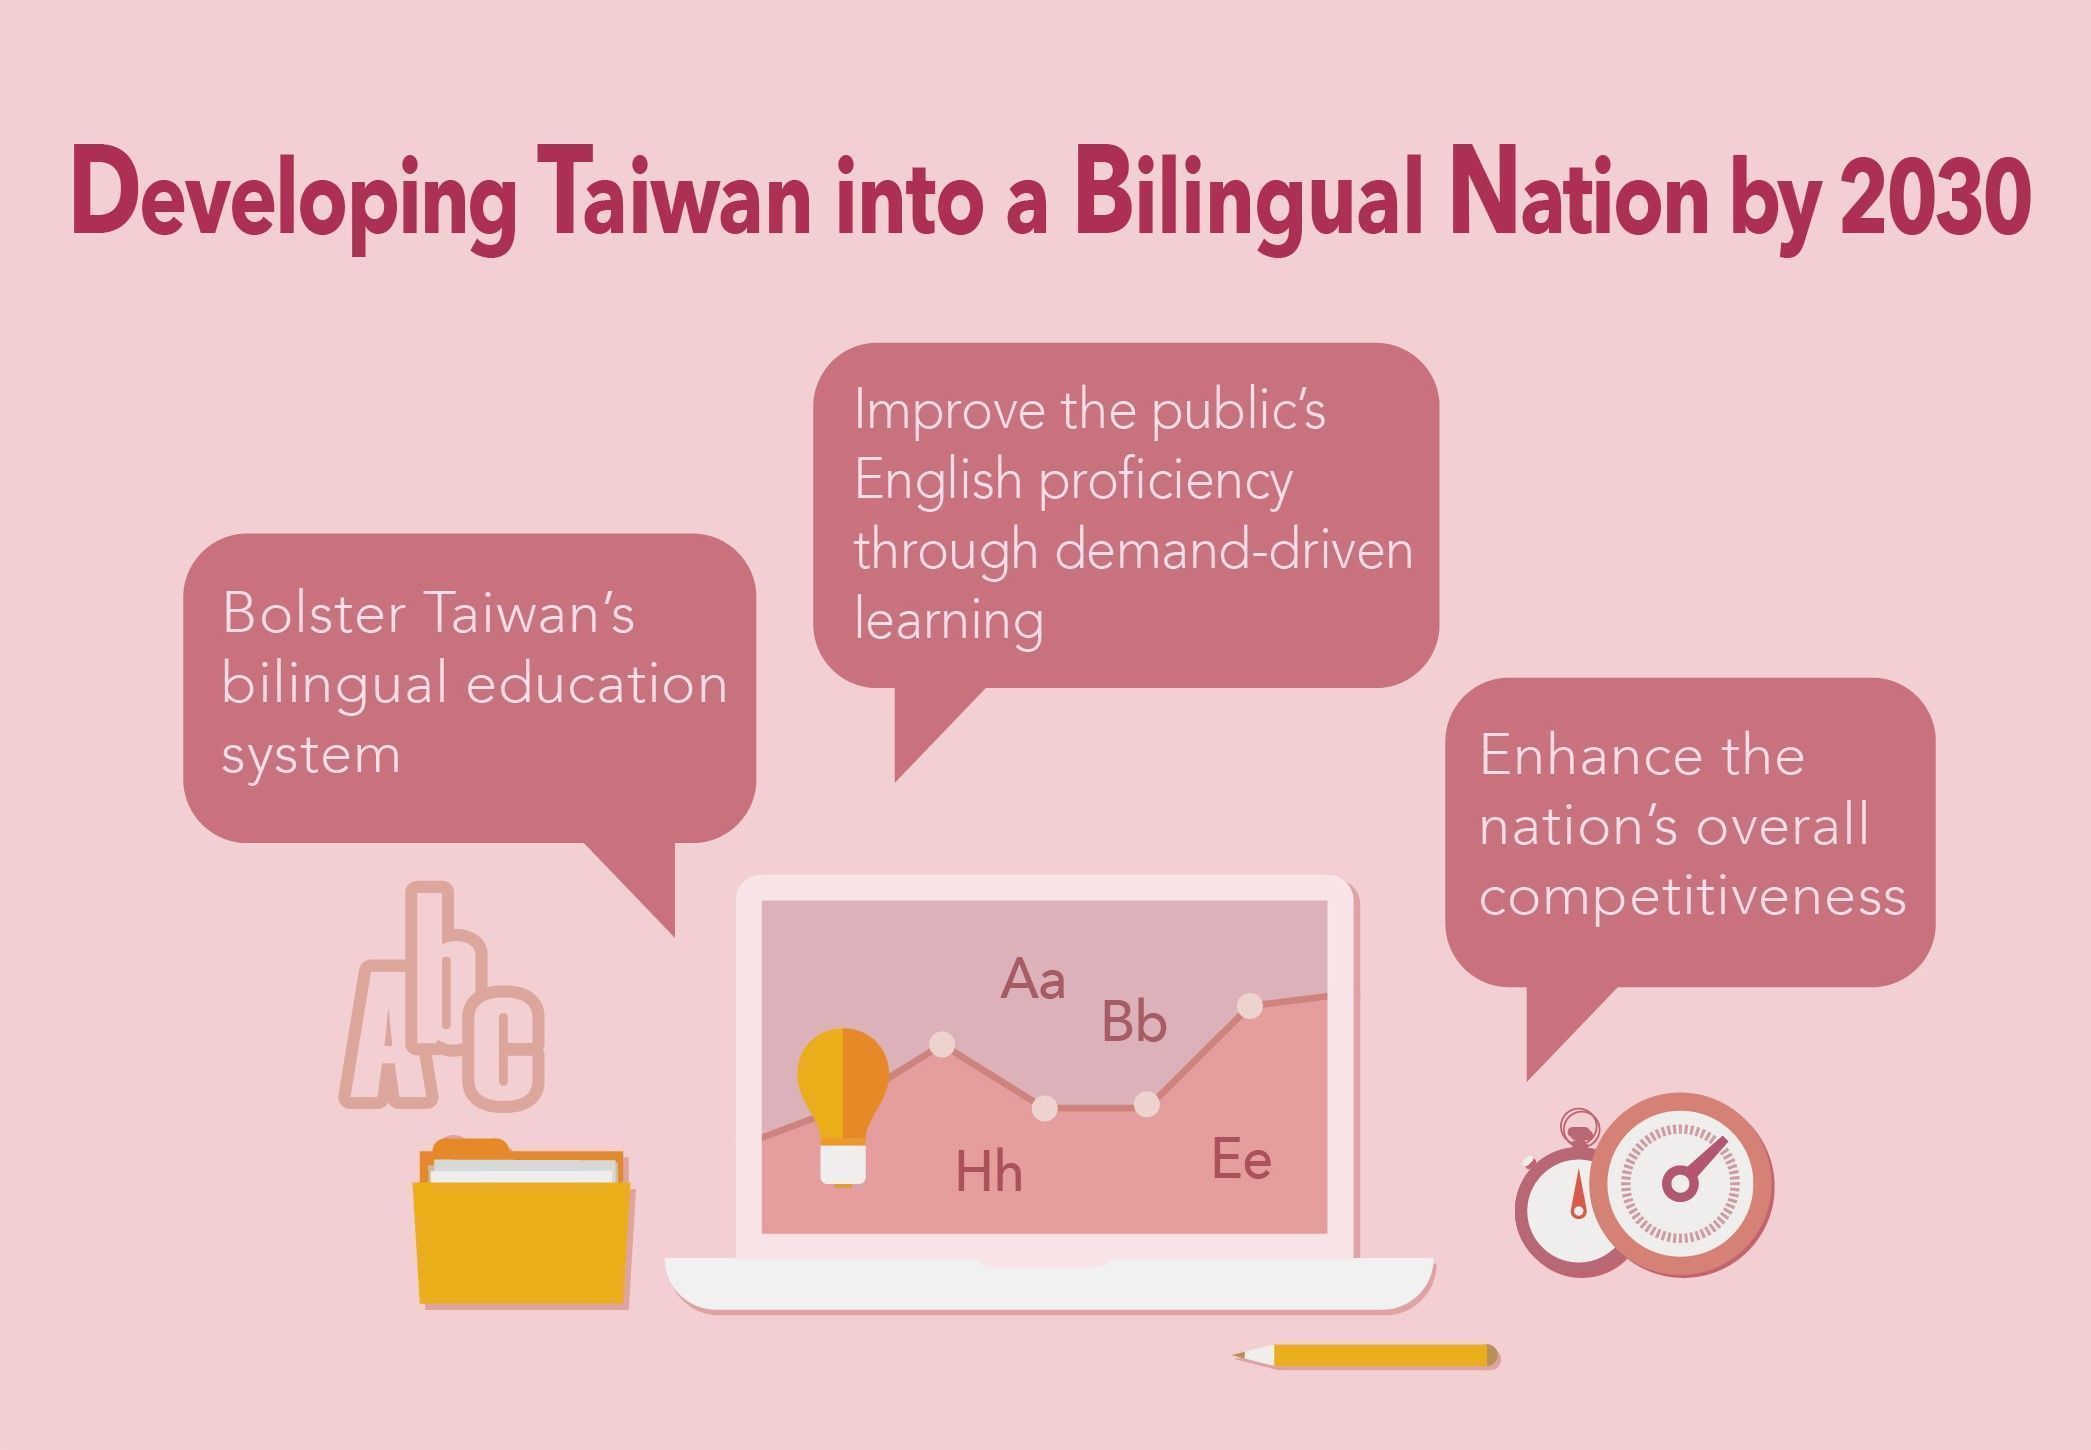 Taiwan’s 2030 goal to become a bilingual nation